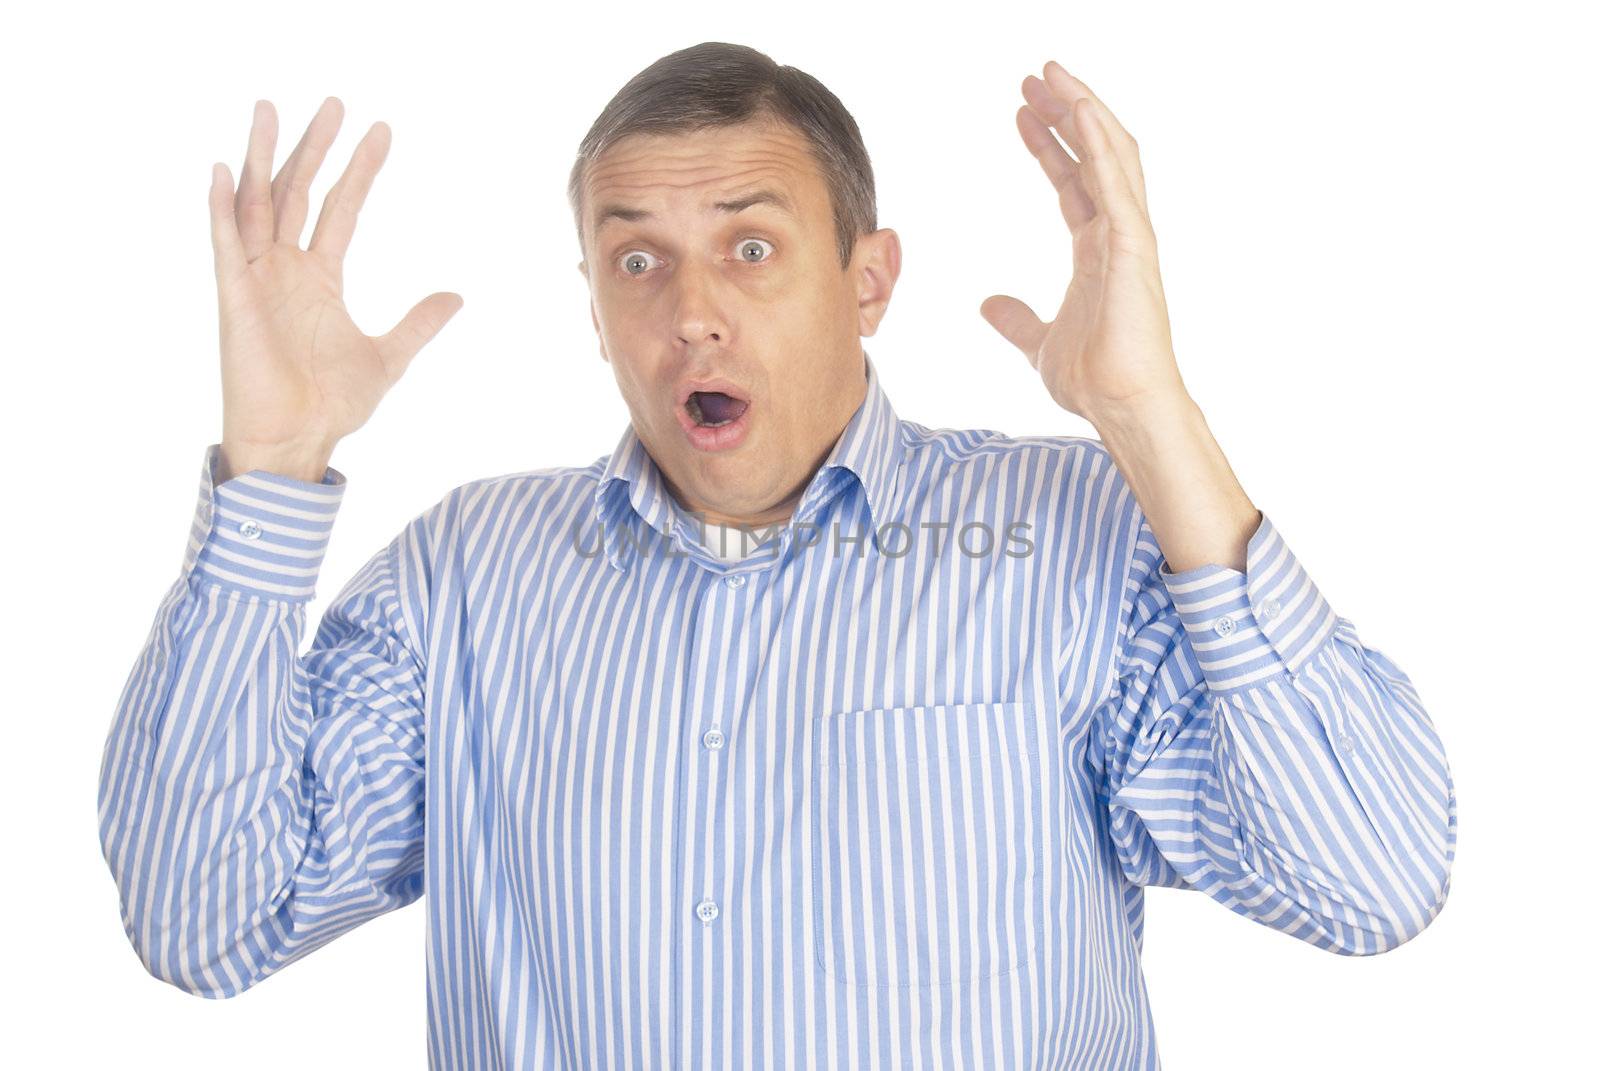 Emotion of surprise at the adult man isolated over white background